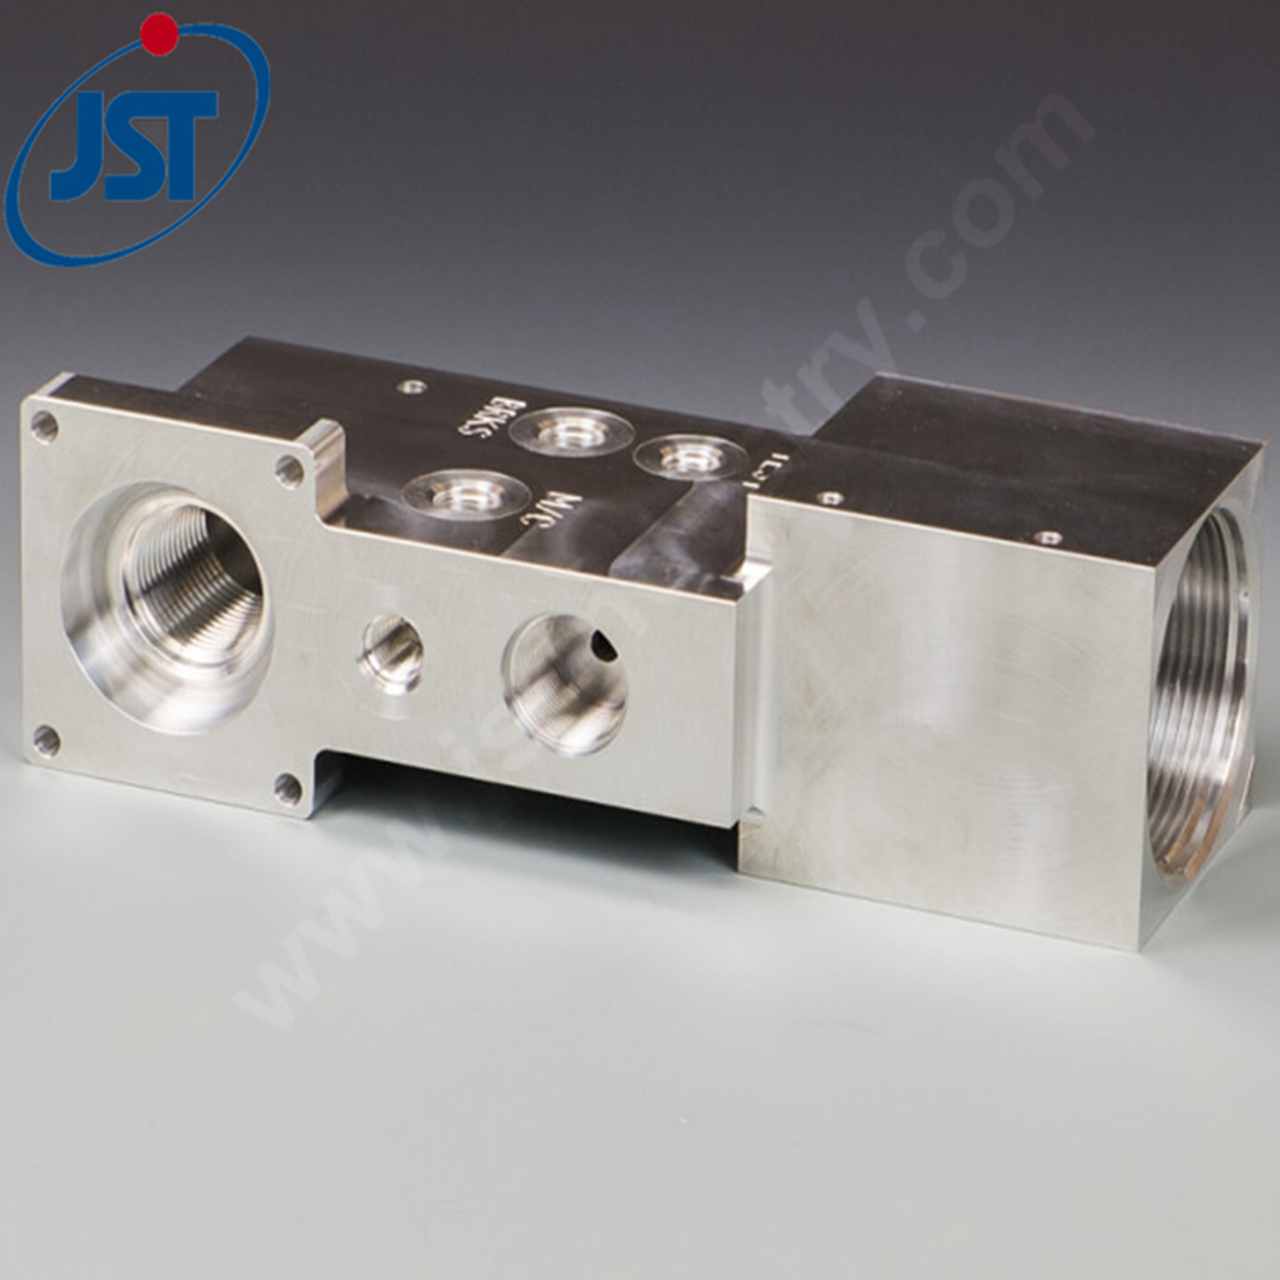 The Widely Application of CNC Machining Aluminum Parts In The Field of New Energy Auto